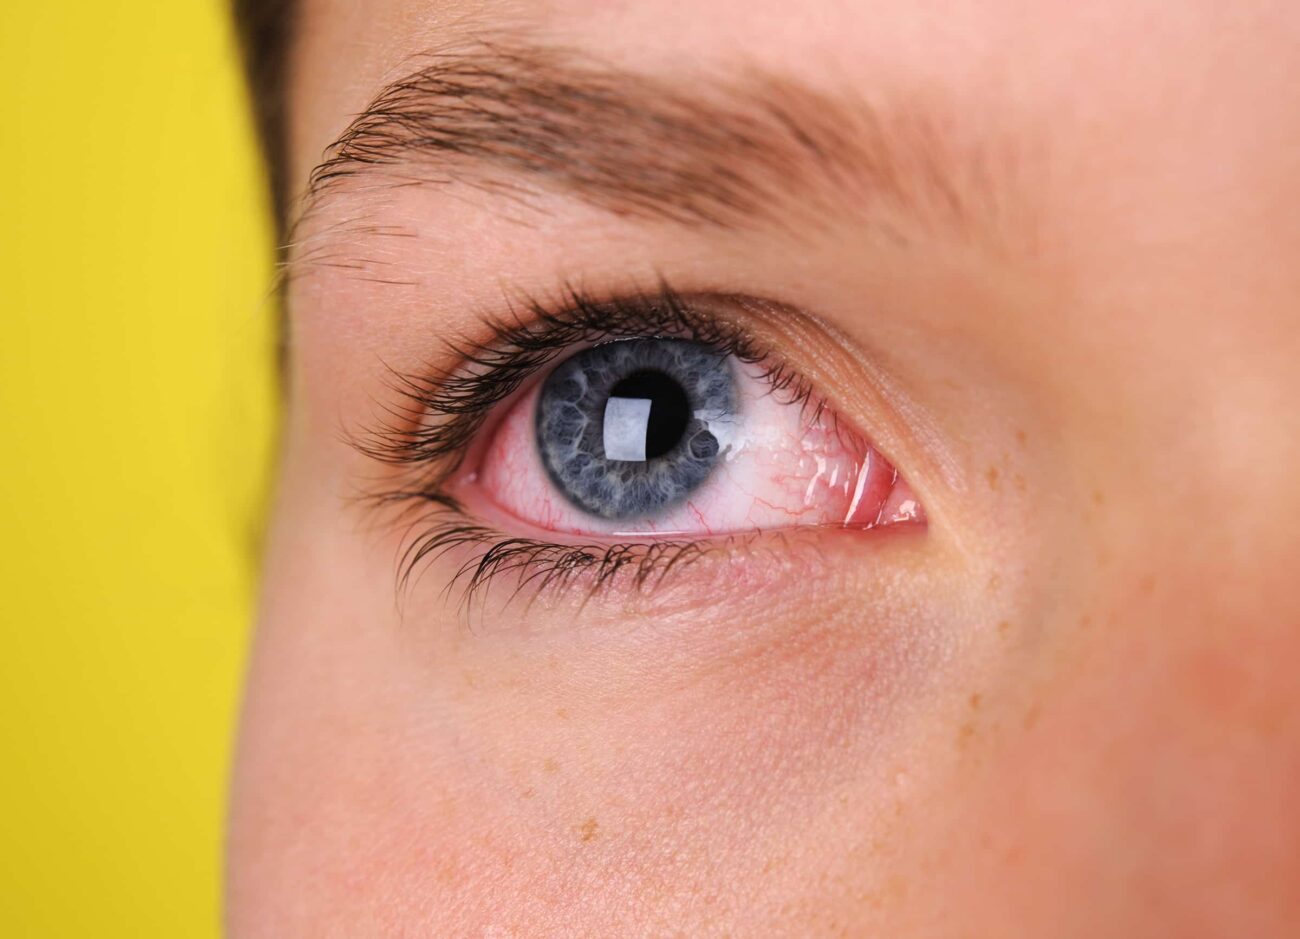 Knowing when to attend the doctor is hard. Should you visit the ophthalmologist? We'll show you a list of reasons that indicate the possibilities.